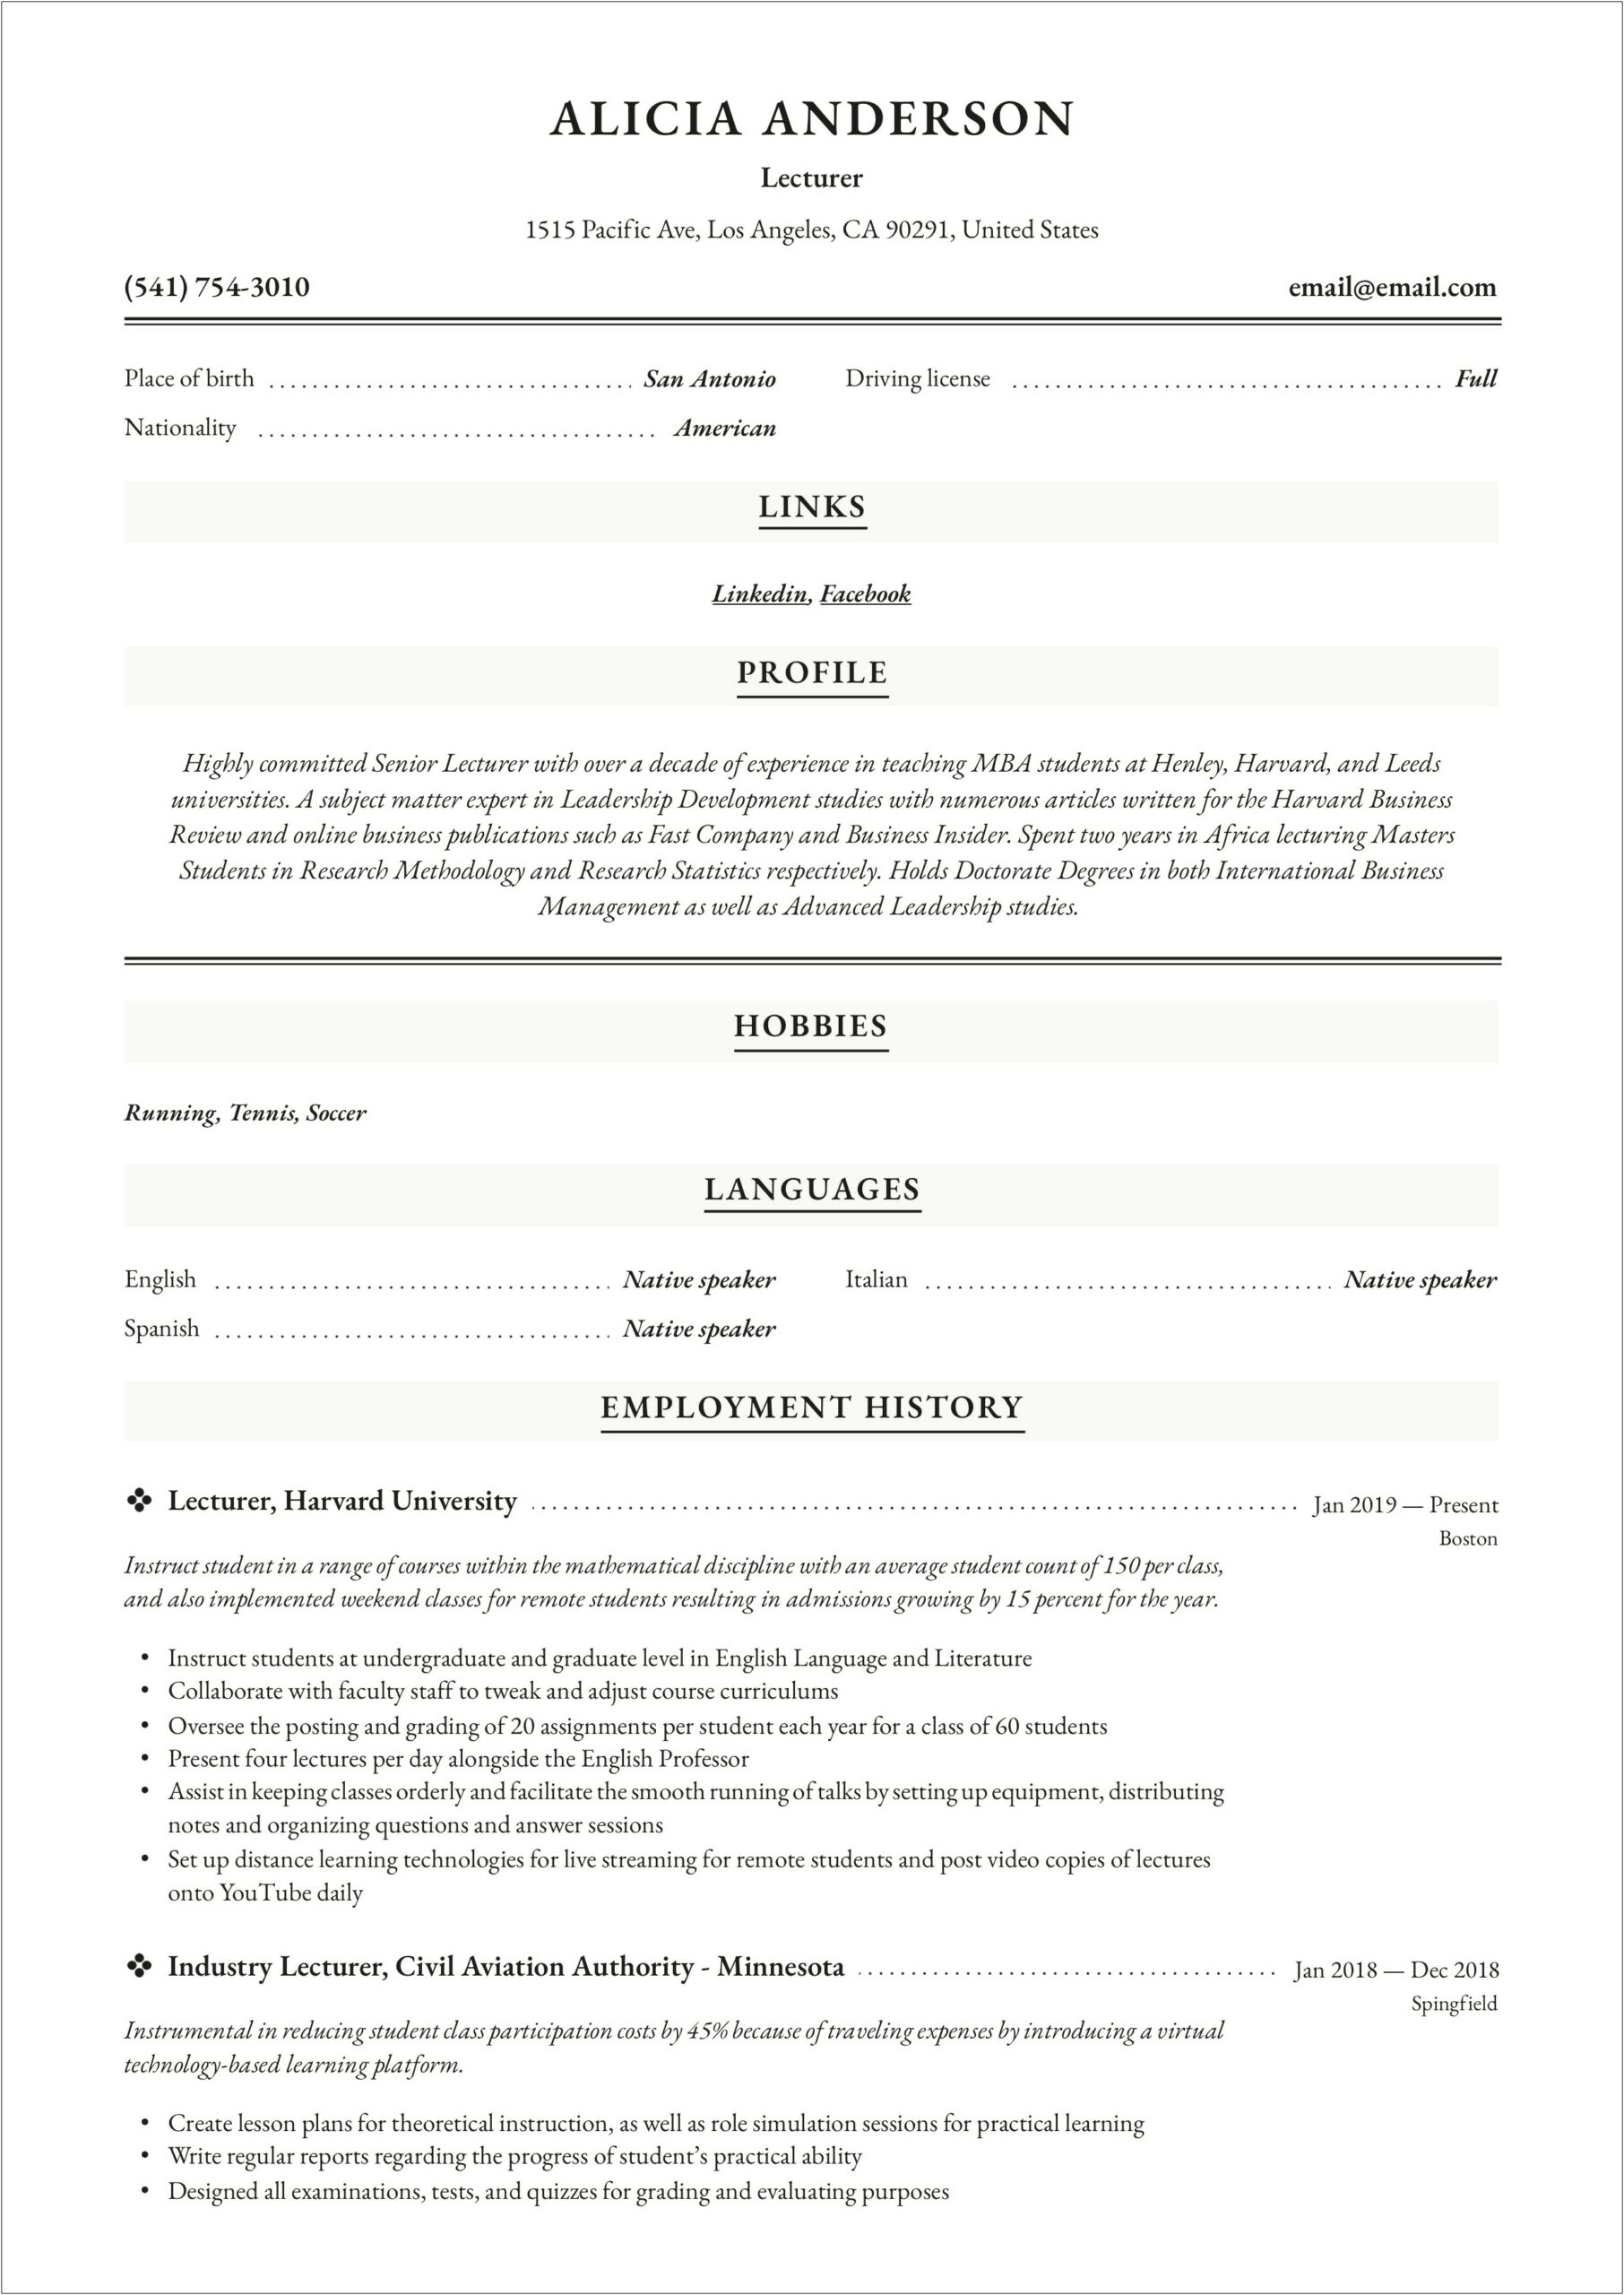 Sample Resume For Lecturer Post In Engineering College